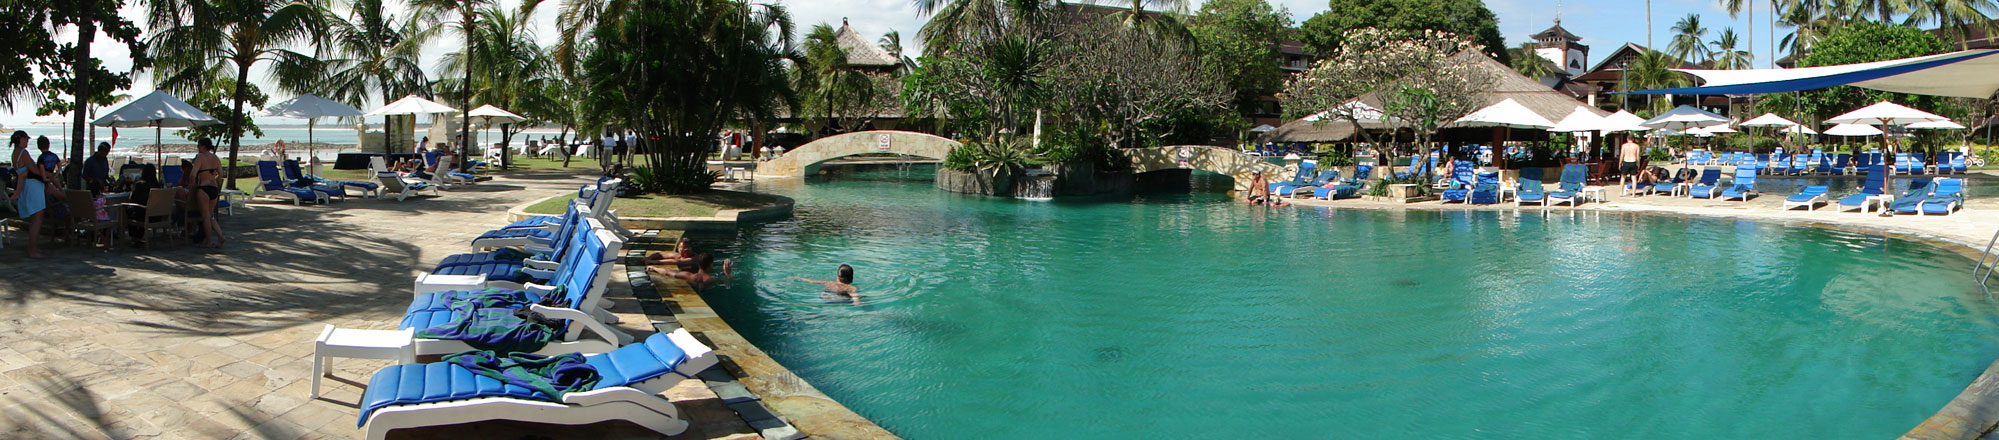 Hotel with swimming pool